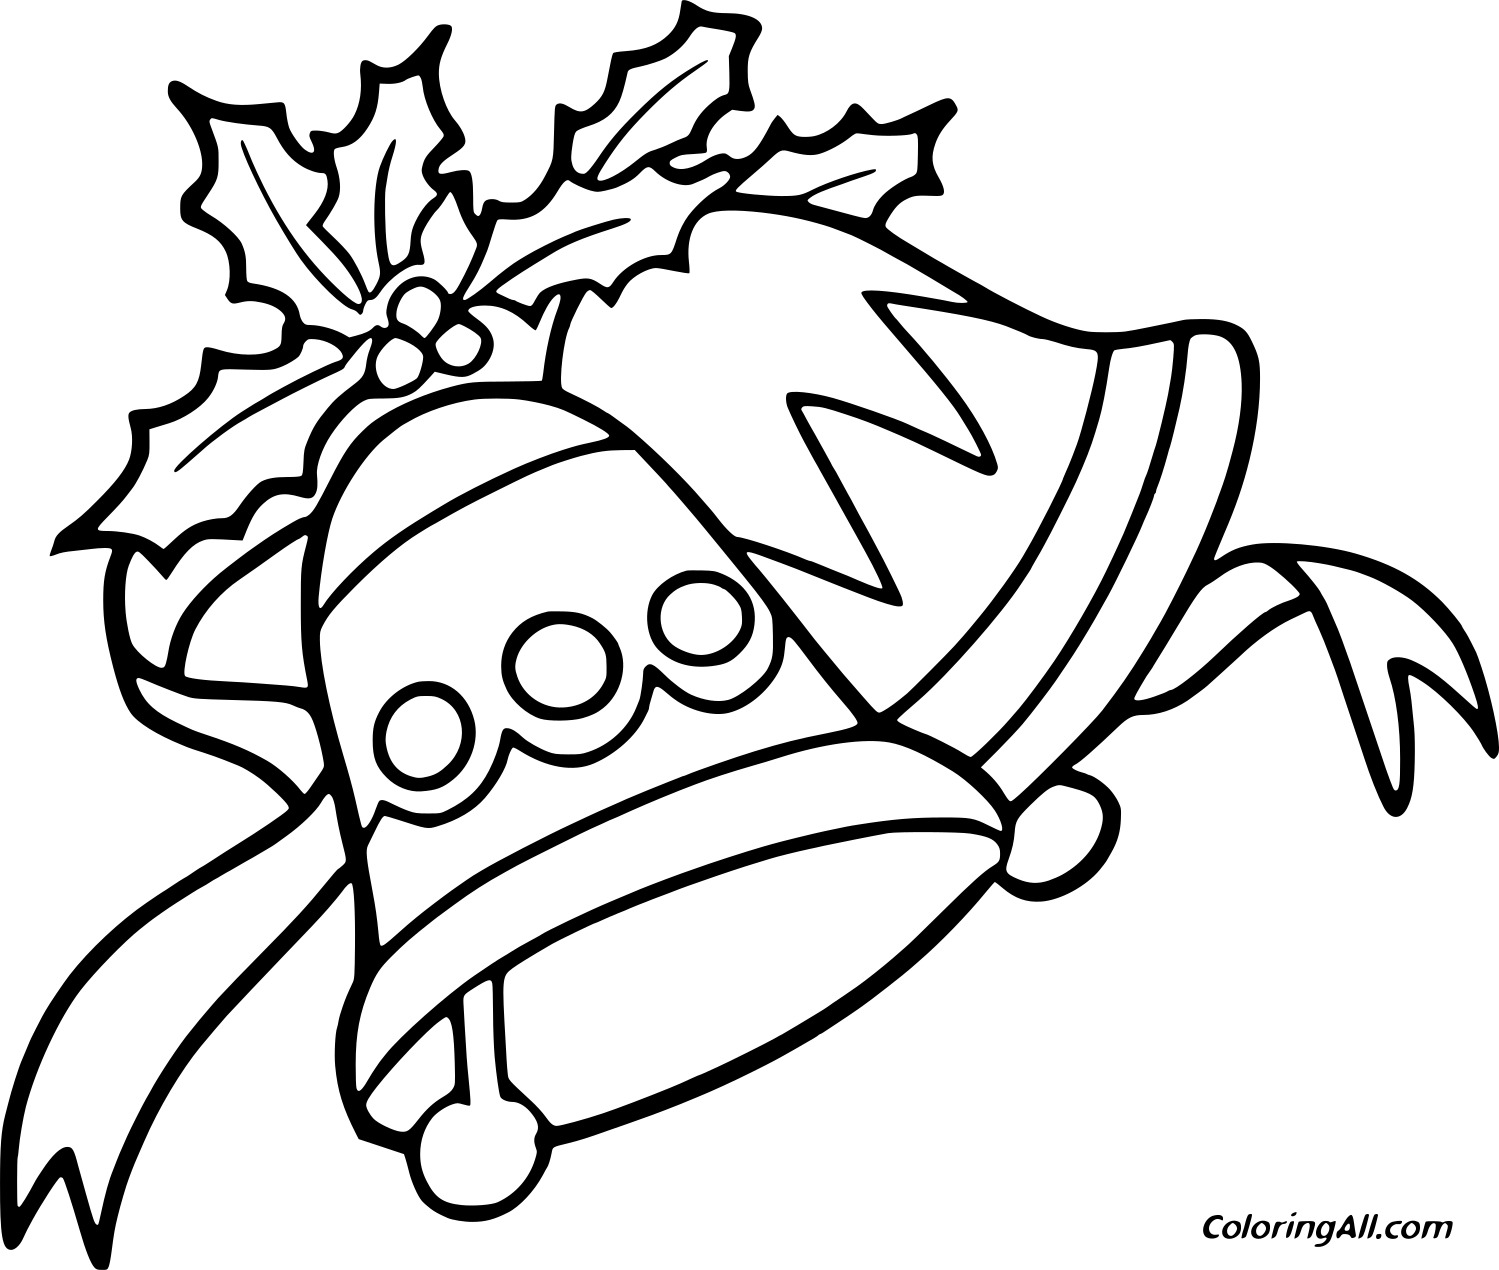 Jingle Bells And Holly For Kids Coloring Page